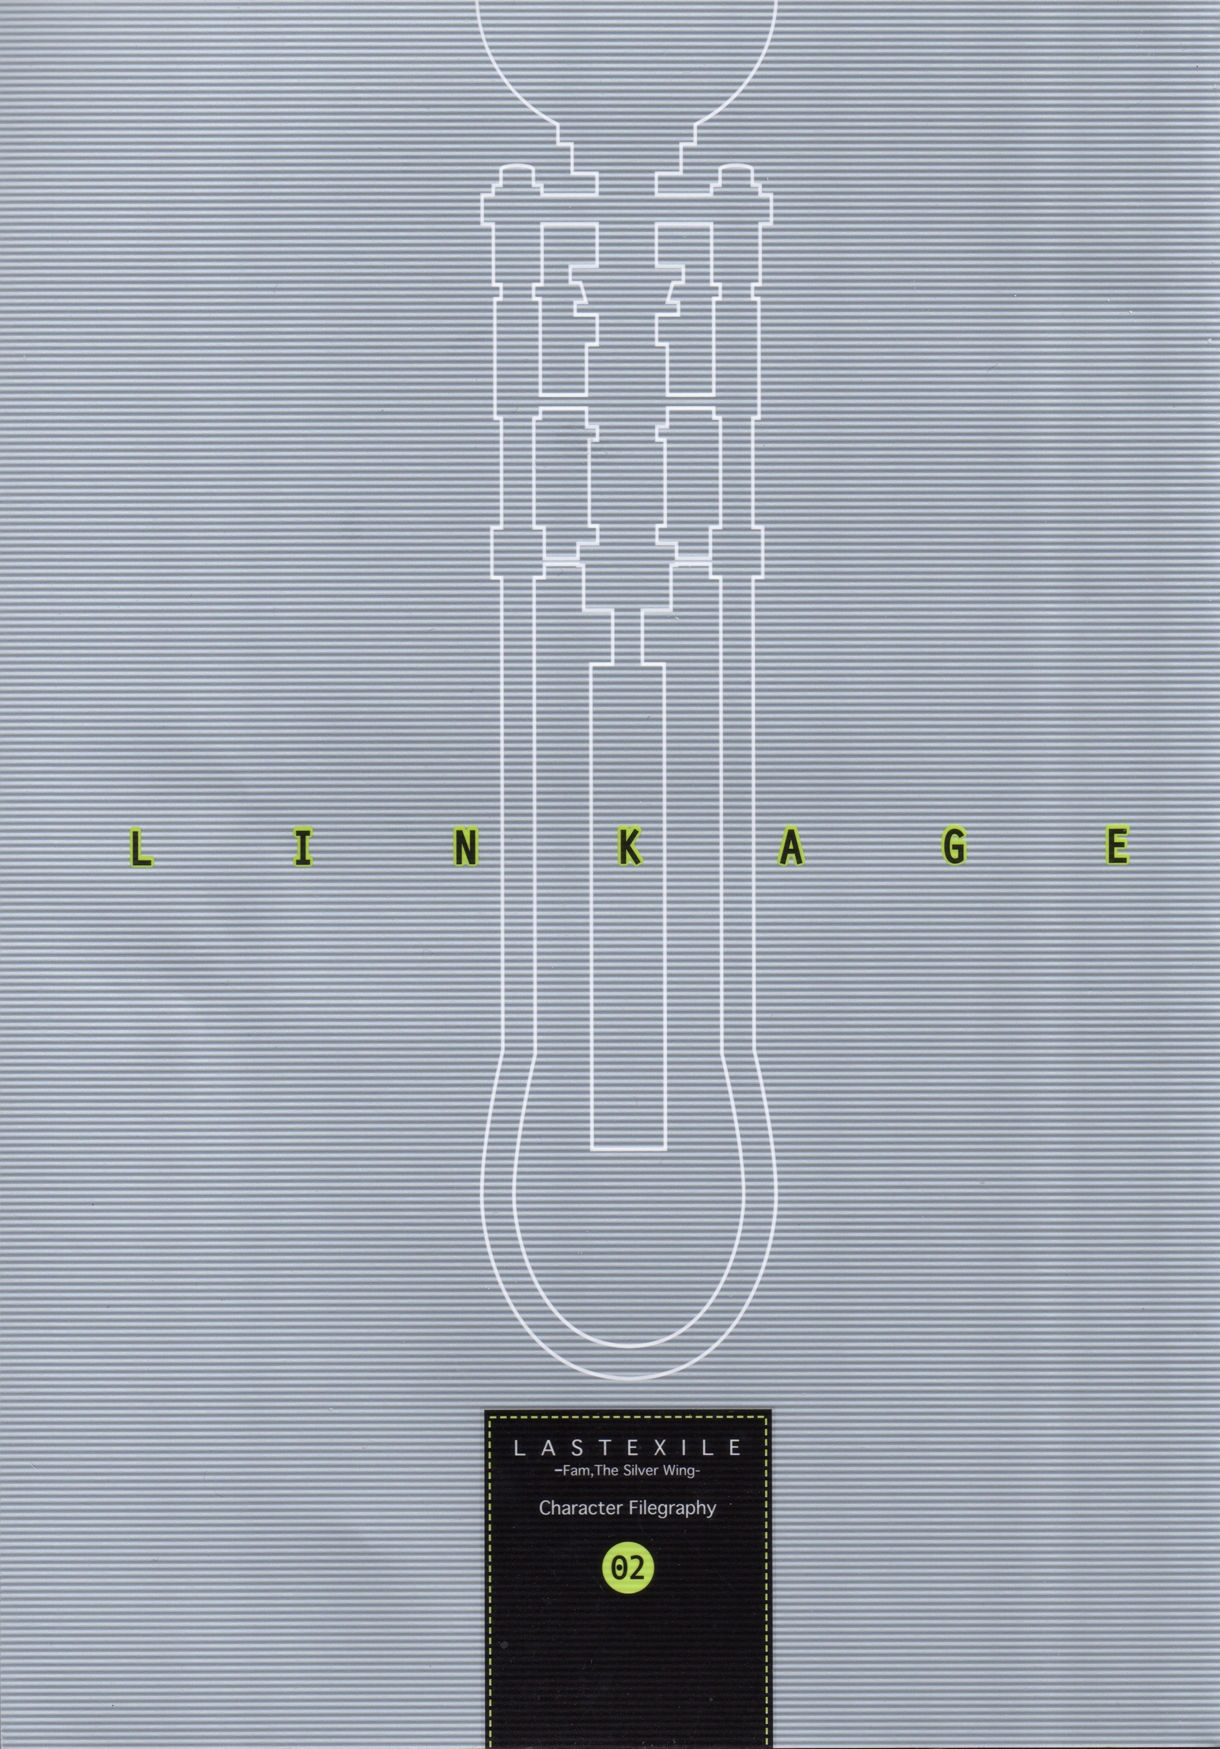 [Pasta's Estab (Range Murata)] Linkage - Last Exile ~ Fam, The Silver Wing - Character Filegraphy 02 0